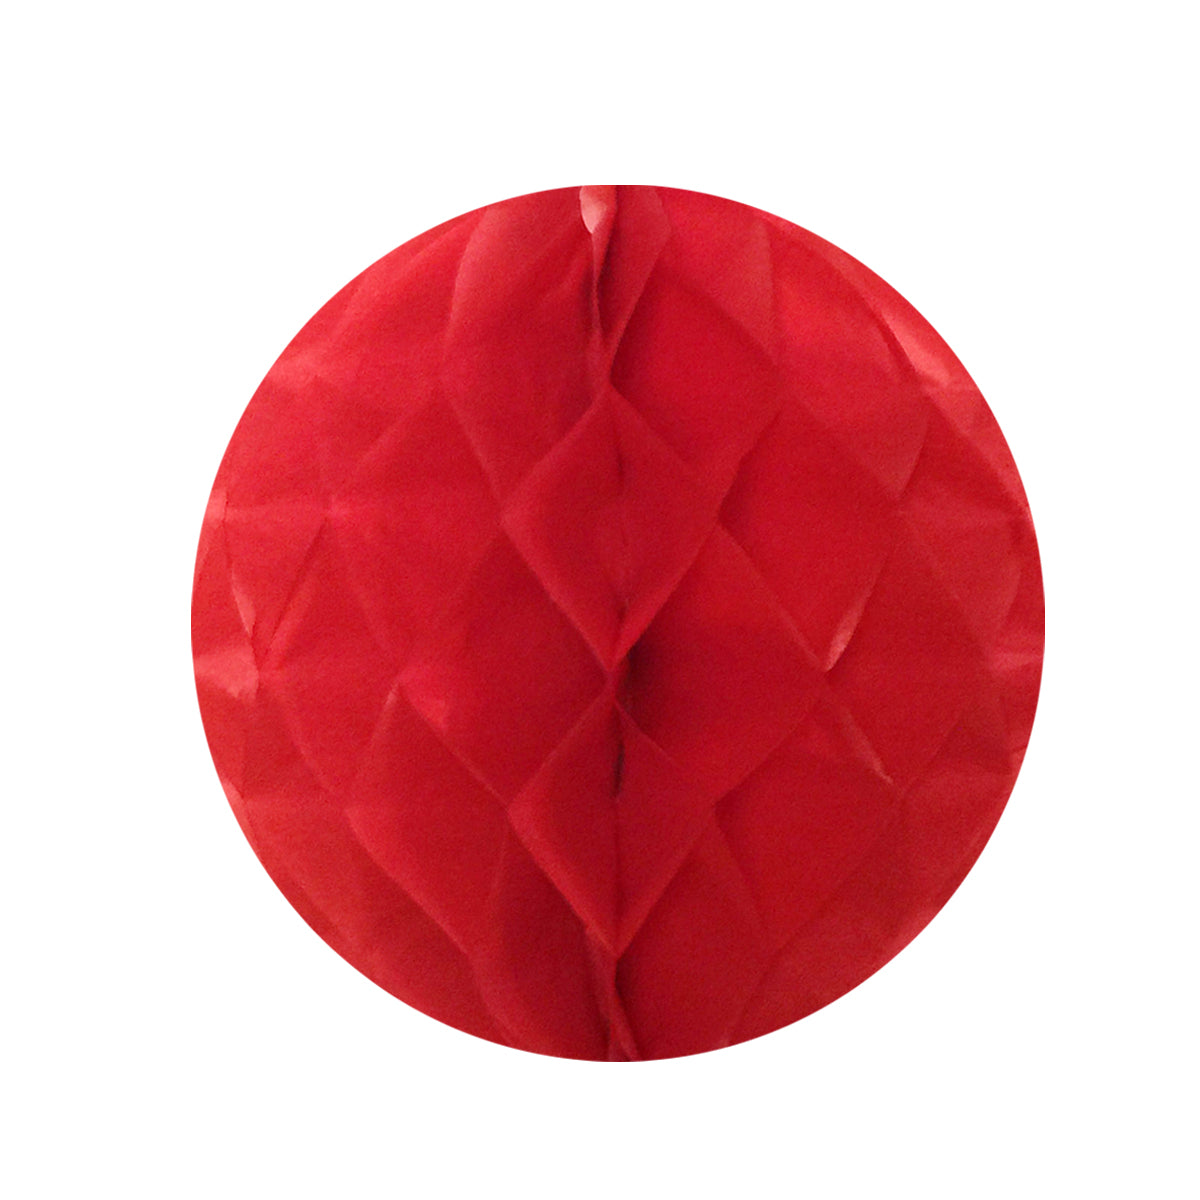 Wrapables 14" Set of 2 Tissue Honeycomb Ball Party Decorations